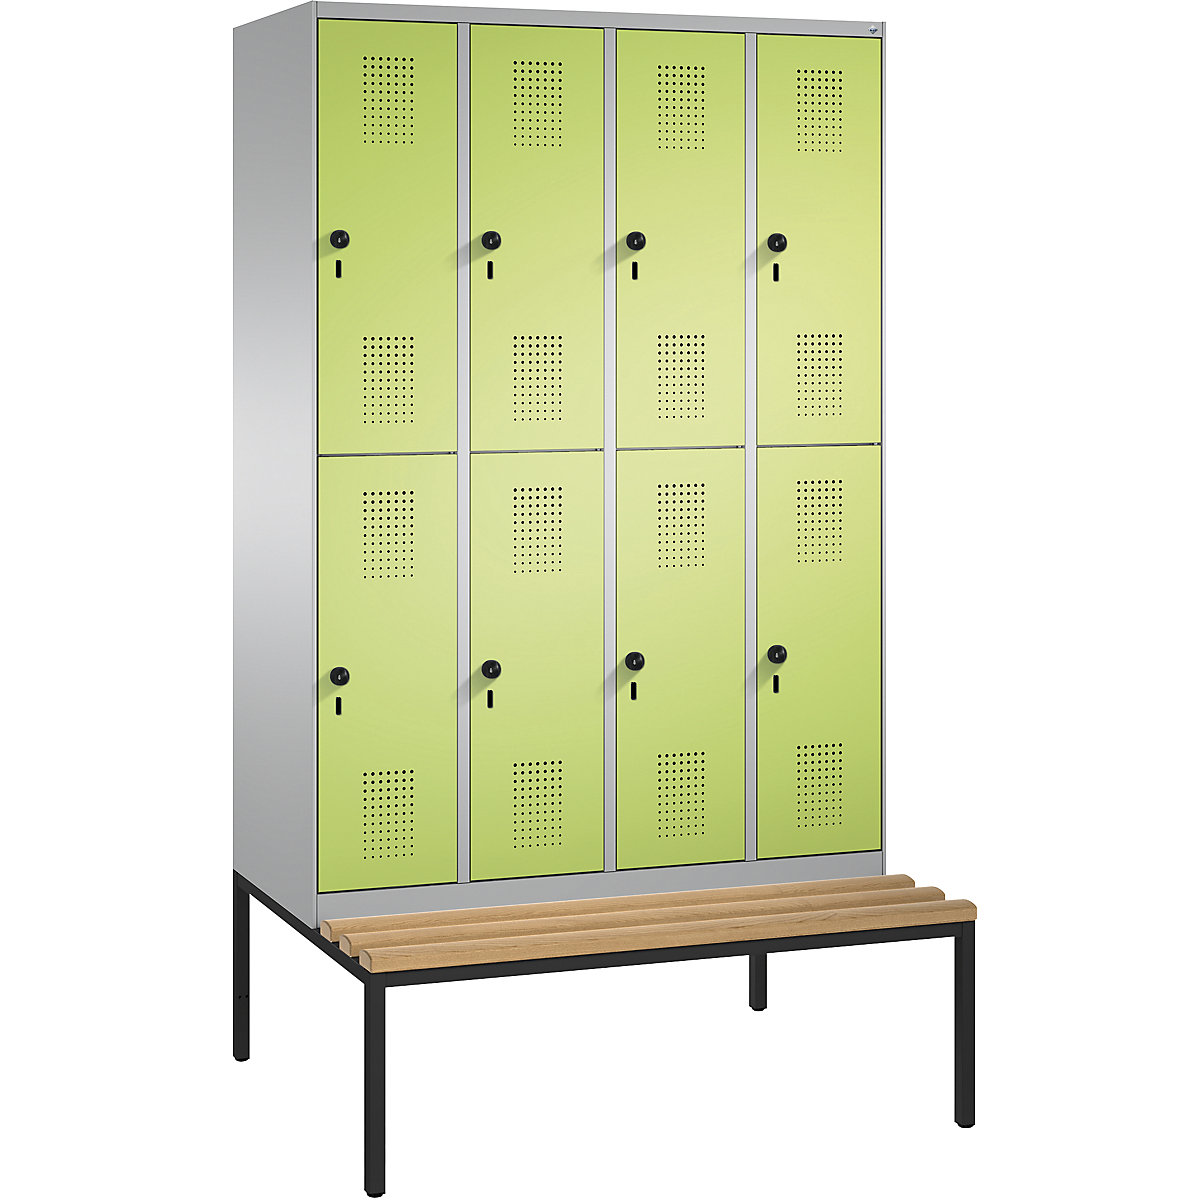 EVOLO cloakroom locker, double tier, with bench – C+P, 4 compartments, 2 shelf compartments each, compartment width 300 mm, white aluminium / viridian green-10